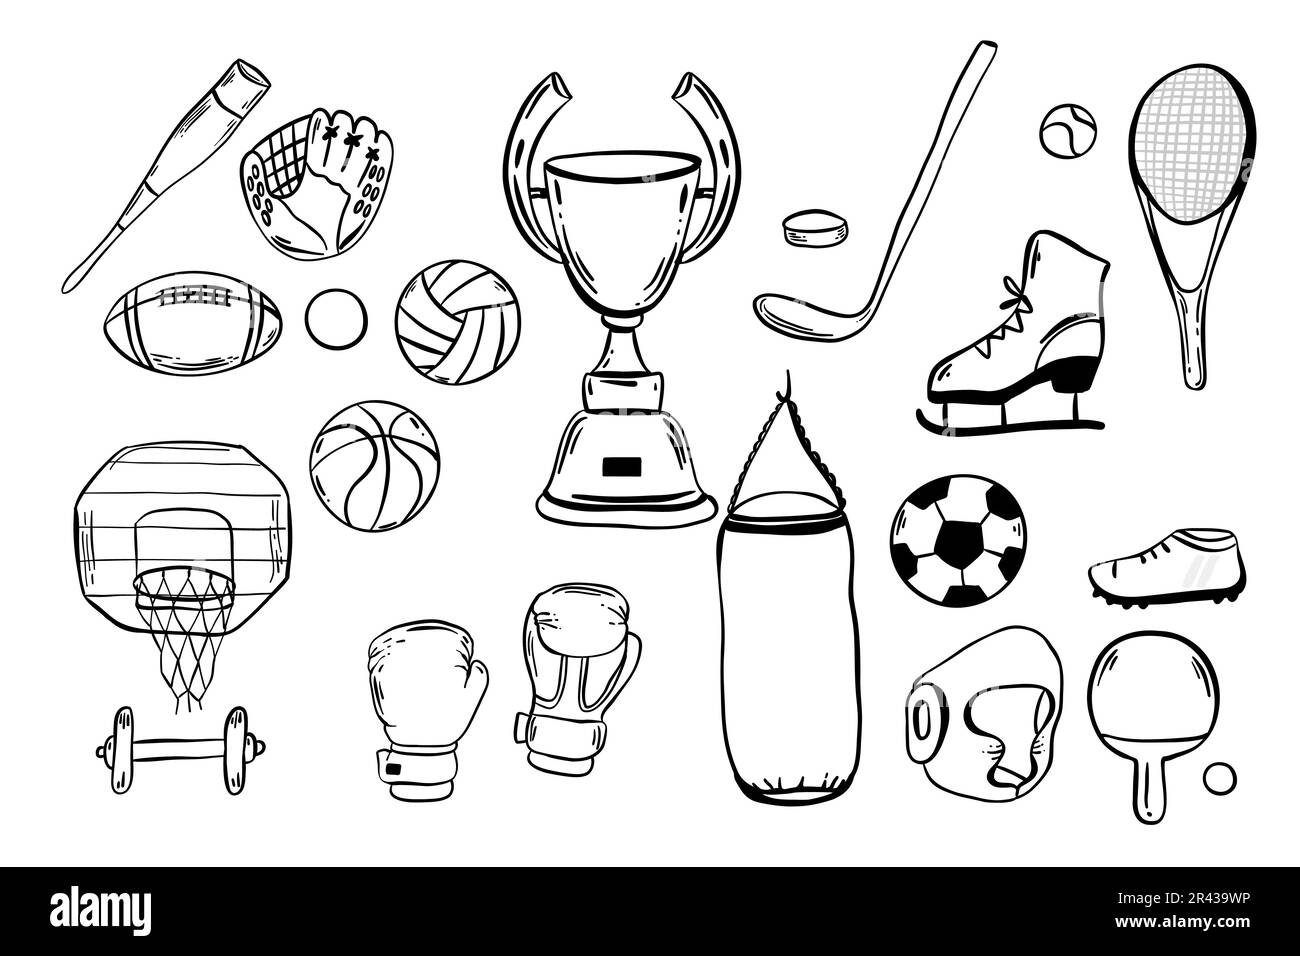 Sport equipment. Vector icons set of sport inventory with balls for volleyball, baseball, football game and tennis, golf ball, billiard, racket, bowli Stock Vector